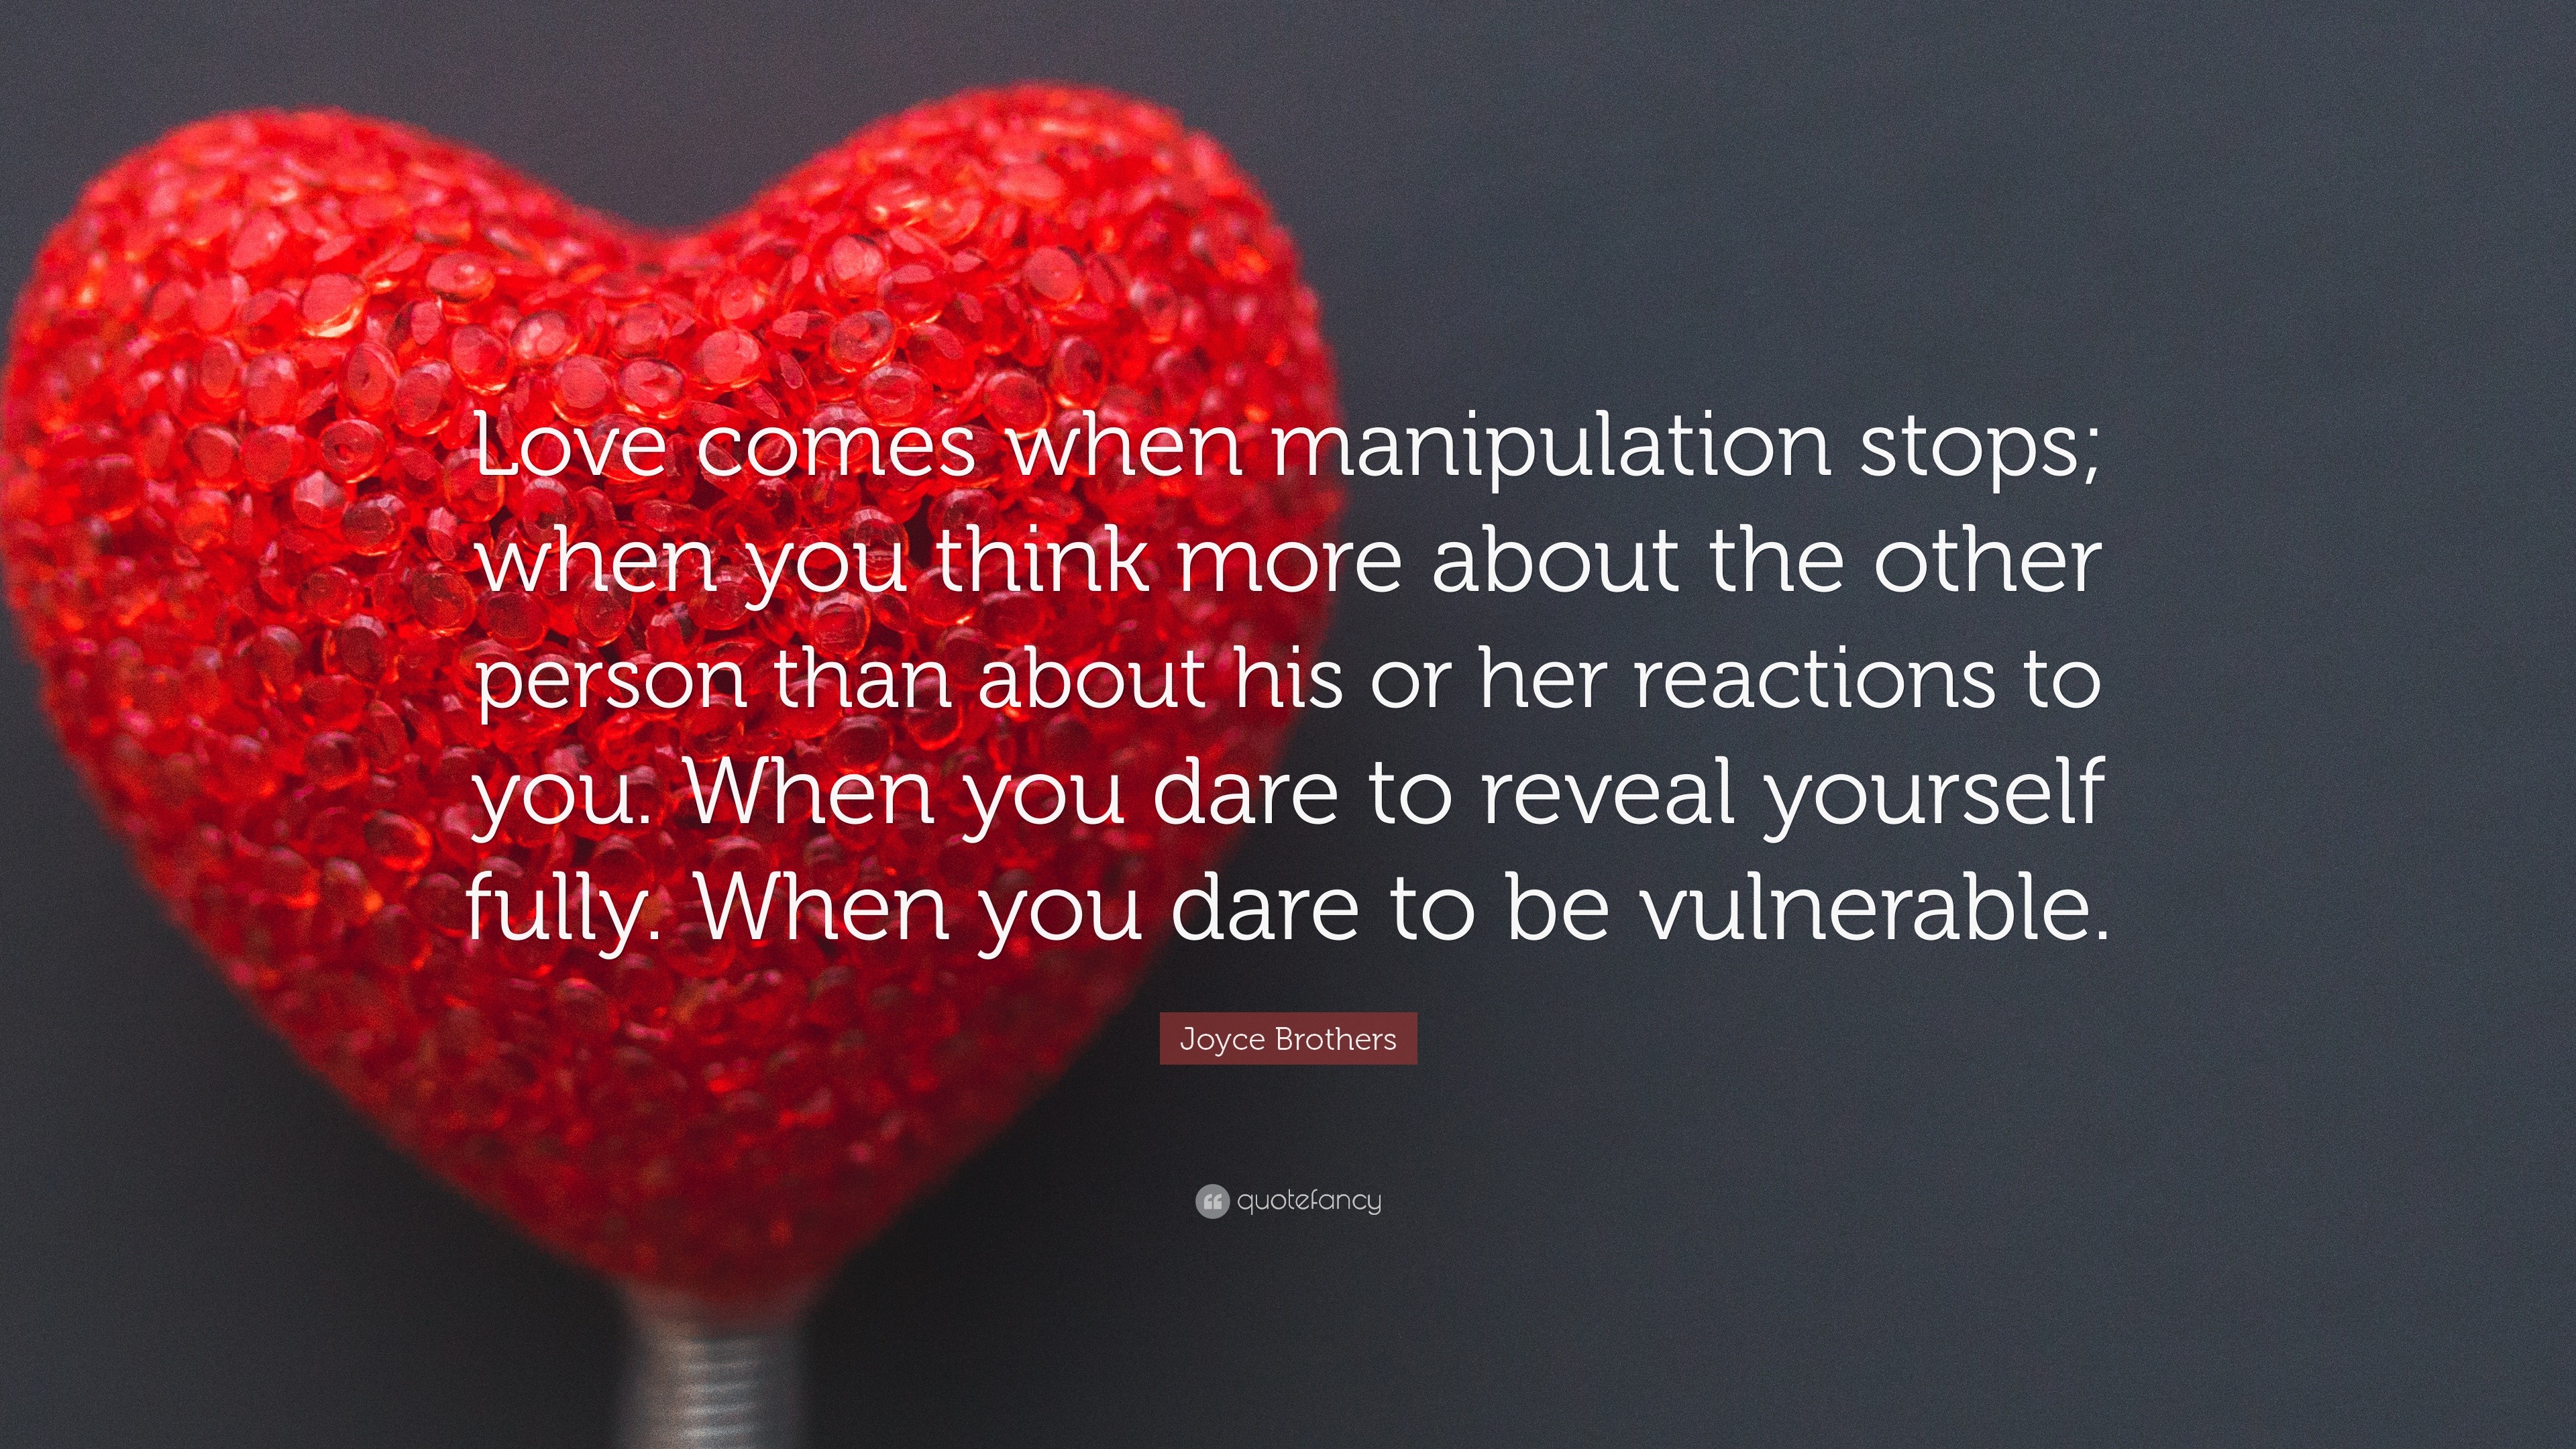 Romantic Quotes “Love es when manipulation stops when you think more about the